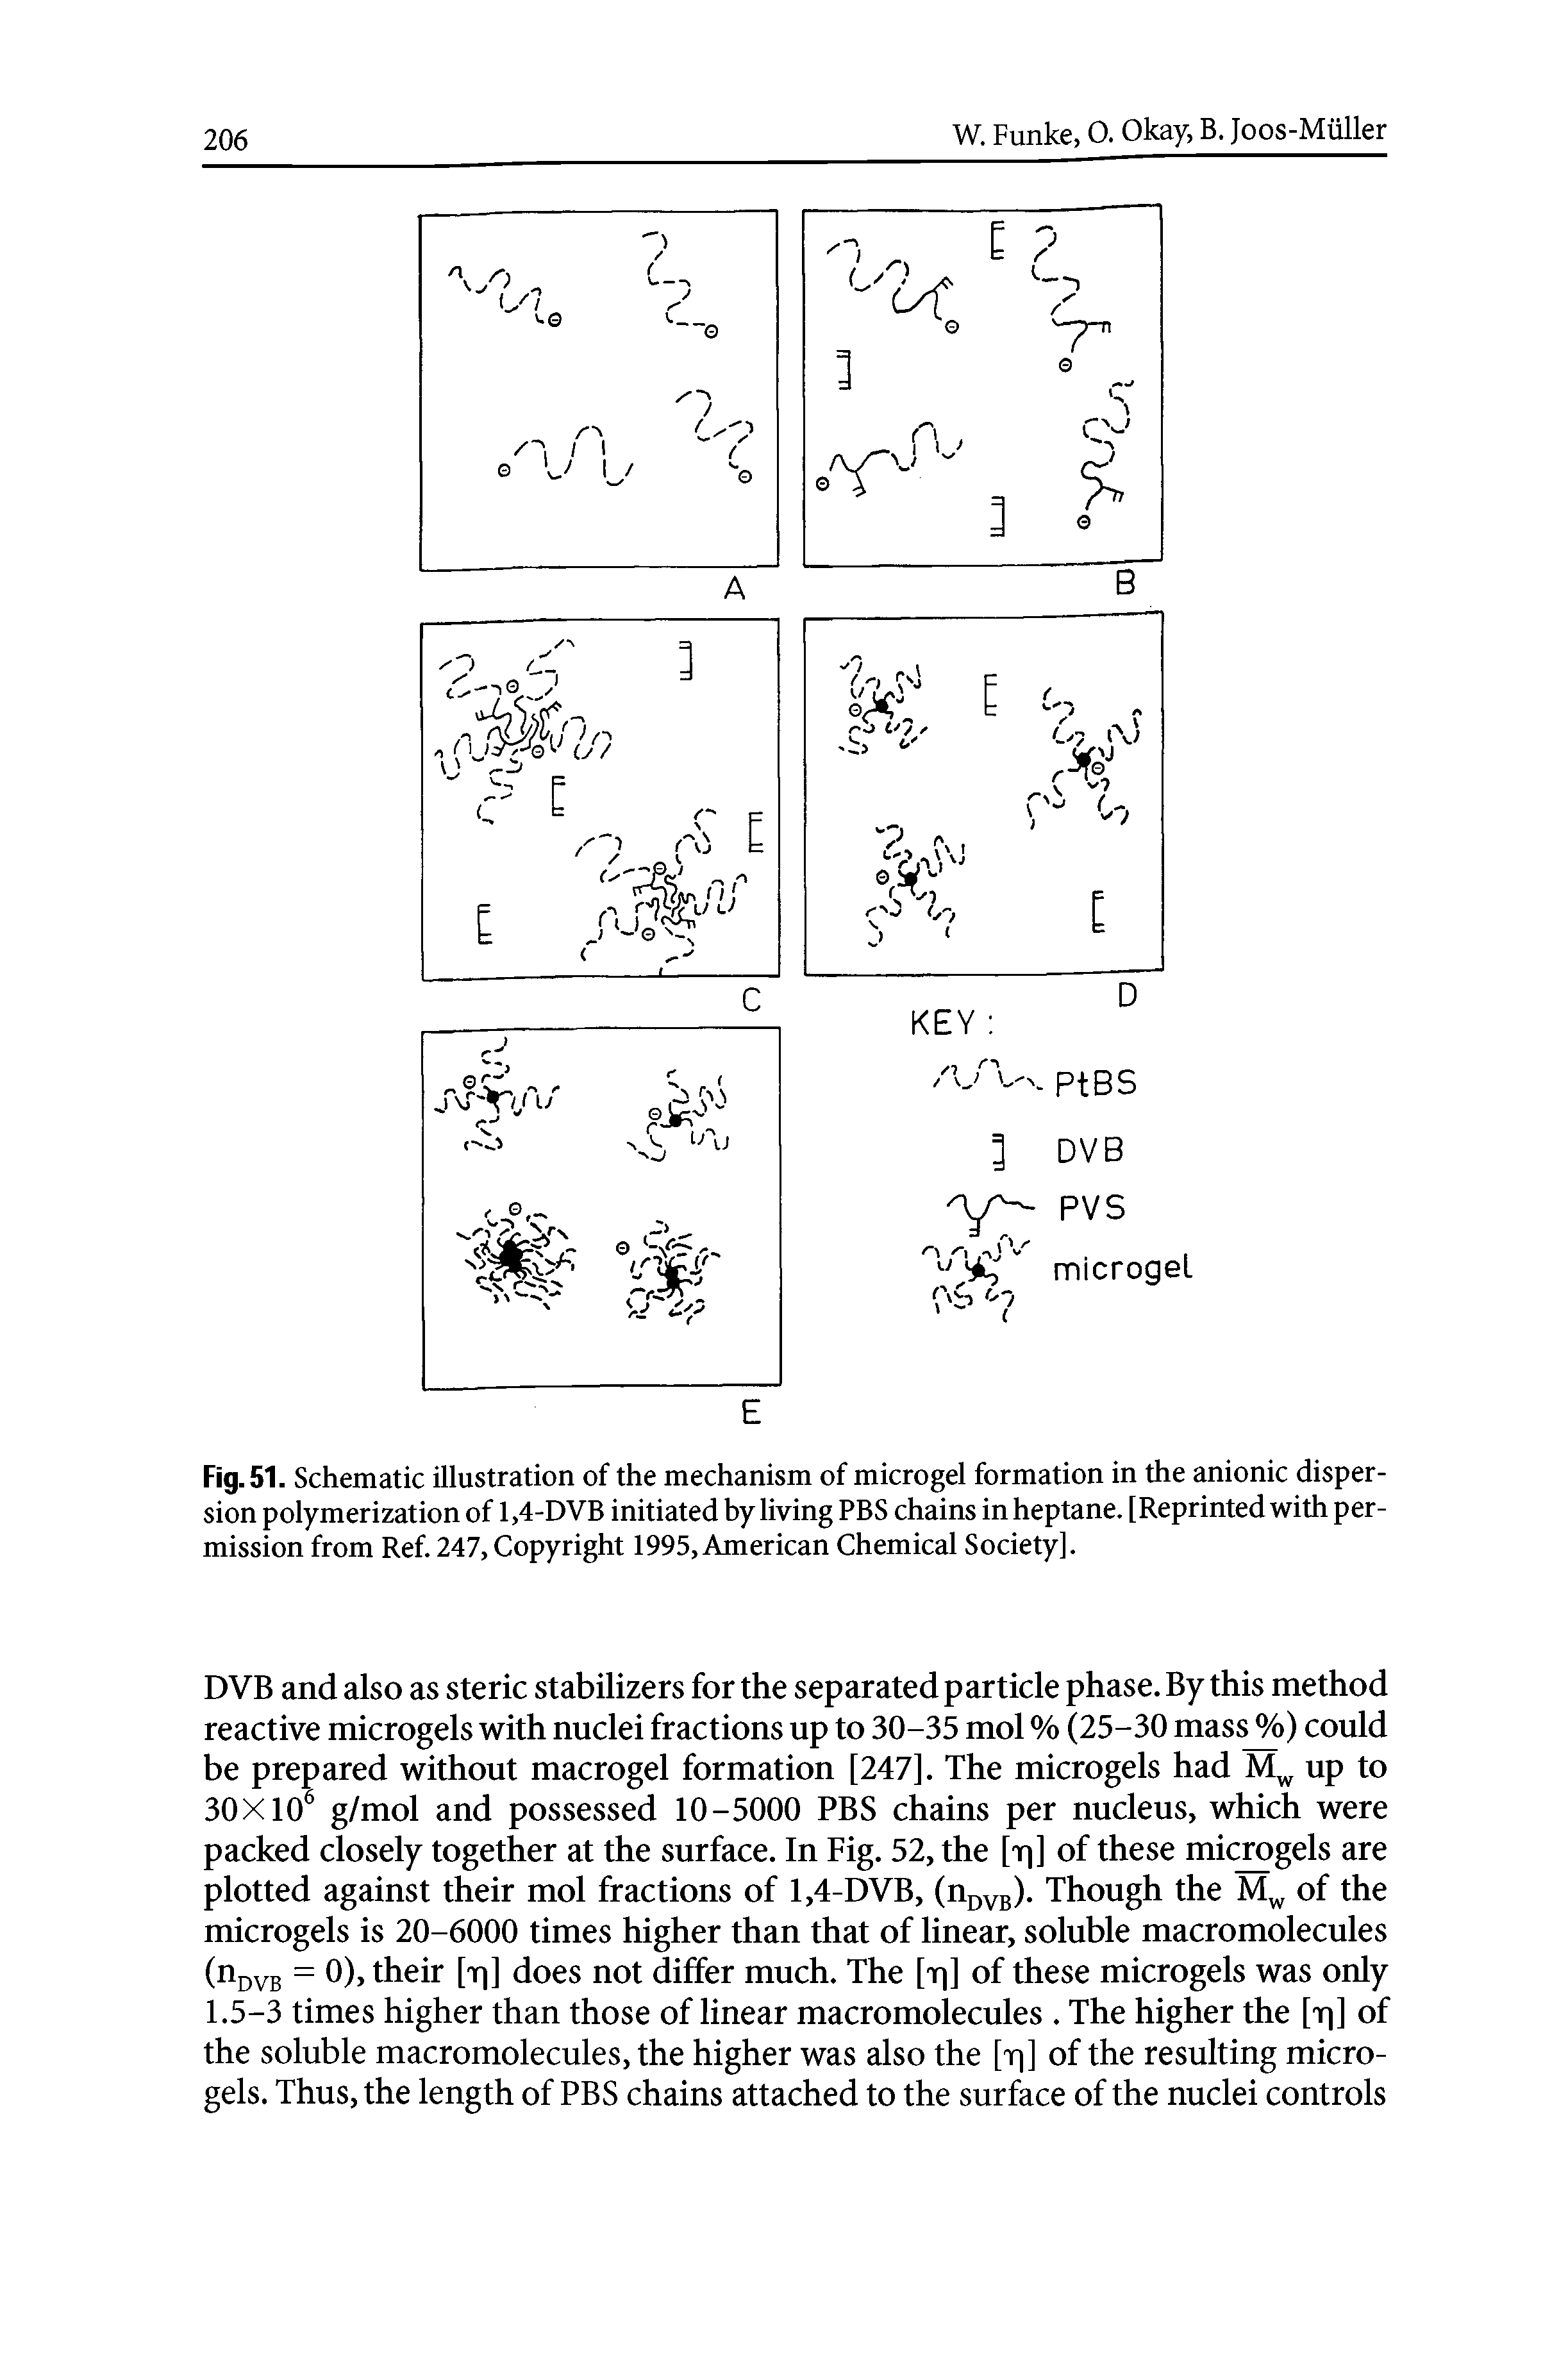 Fig. 51. Schematic illustration of the mechanism of microgel formation in the anionic dispersion polymerization of 1,4-DVB initiated by living PBS chains in heptane. [Reprinted with permission from Ref. 247, Copyright 1995, American Chemical Society].